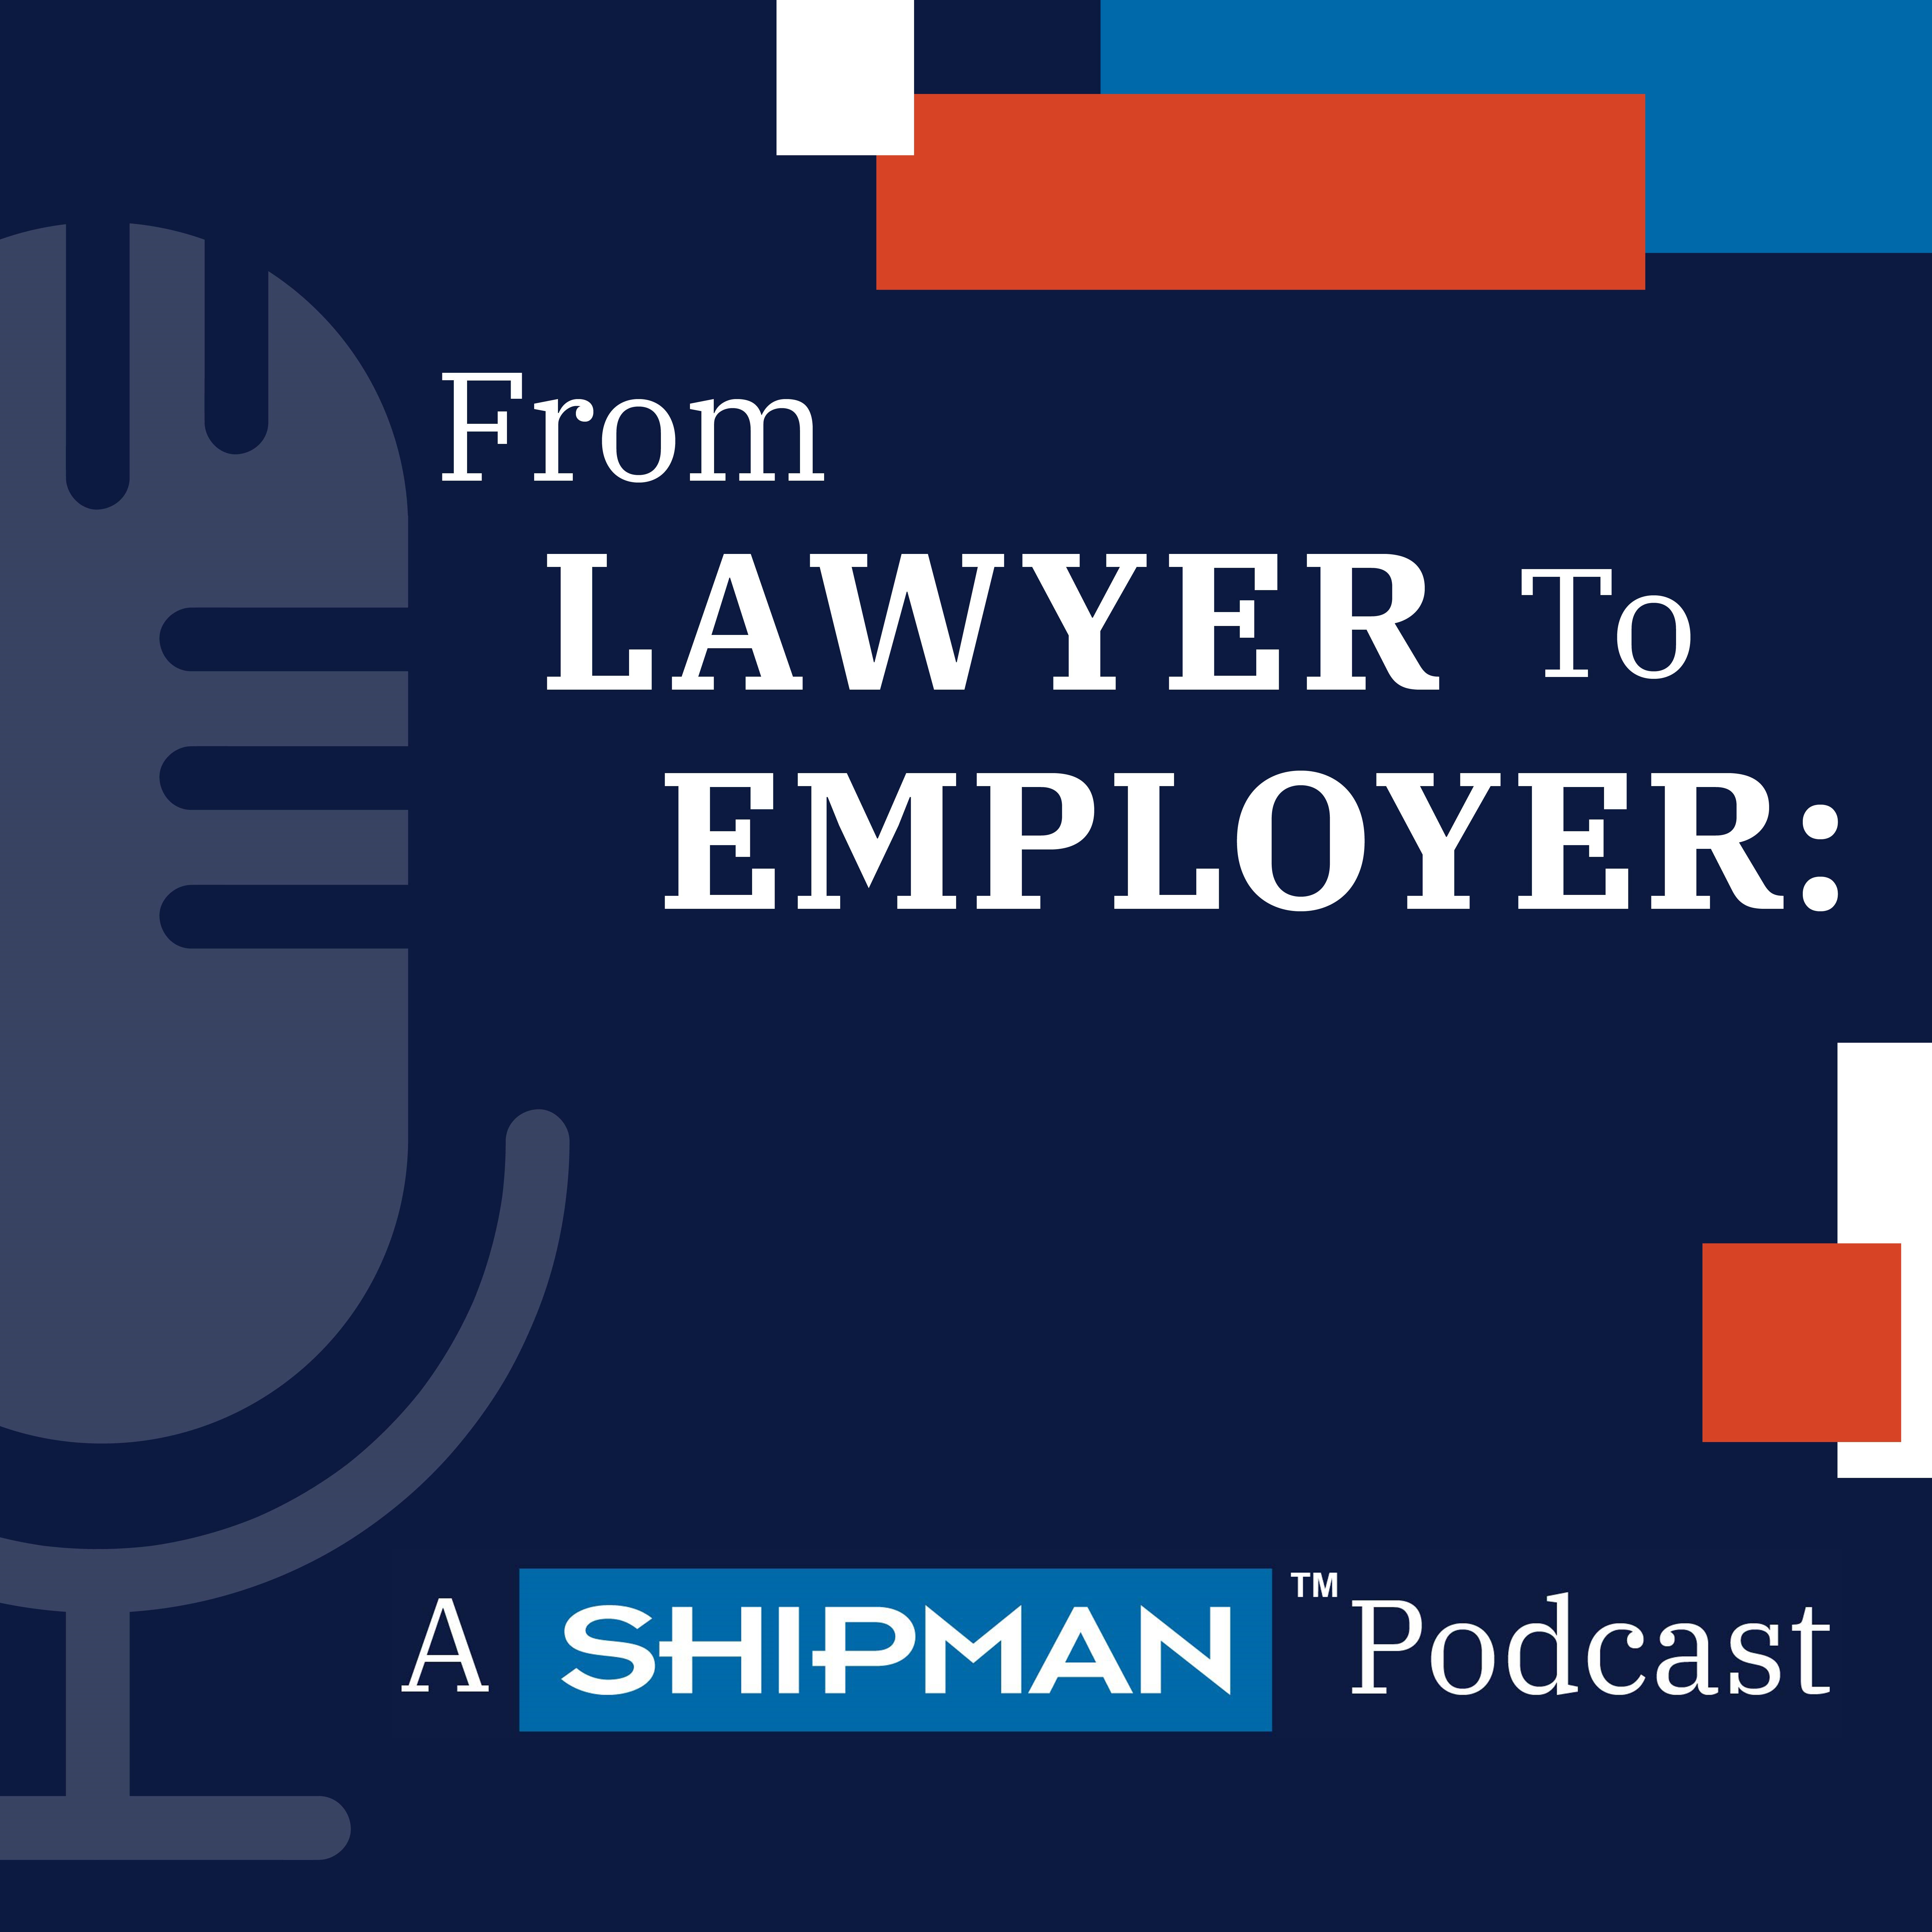 From Lawyer To Employer: A Shipman Podcast Widget